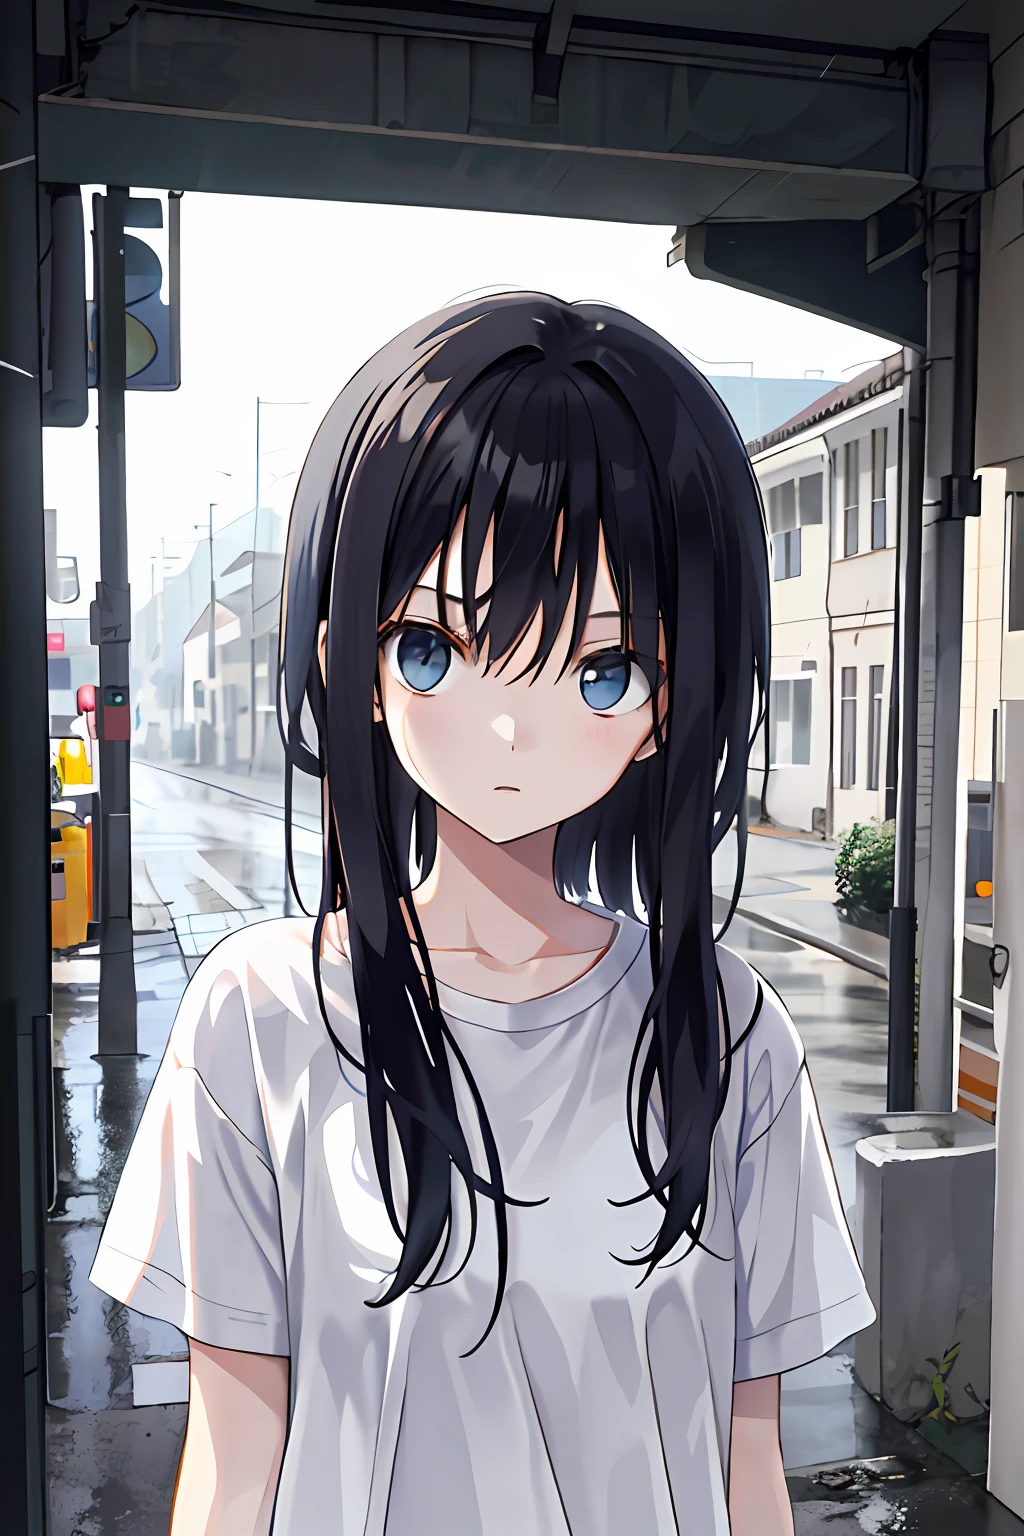 teens girl，clever，White T-shirt，The look sad，Wandering eyes，low head，little bit of raining，Younger sister，Brainwashed